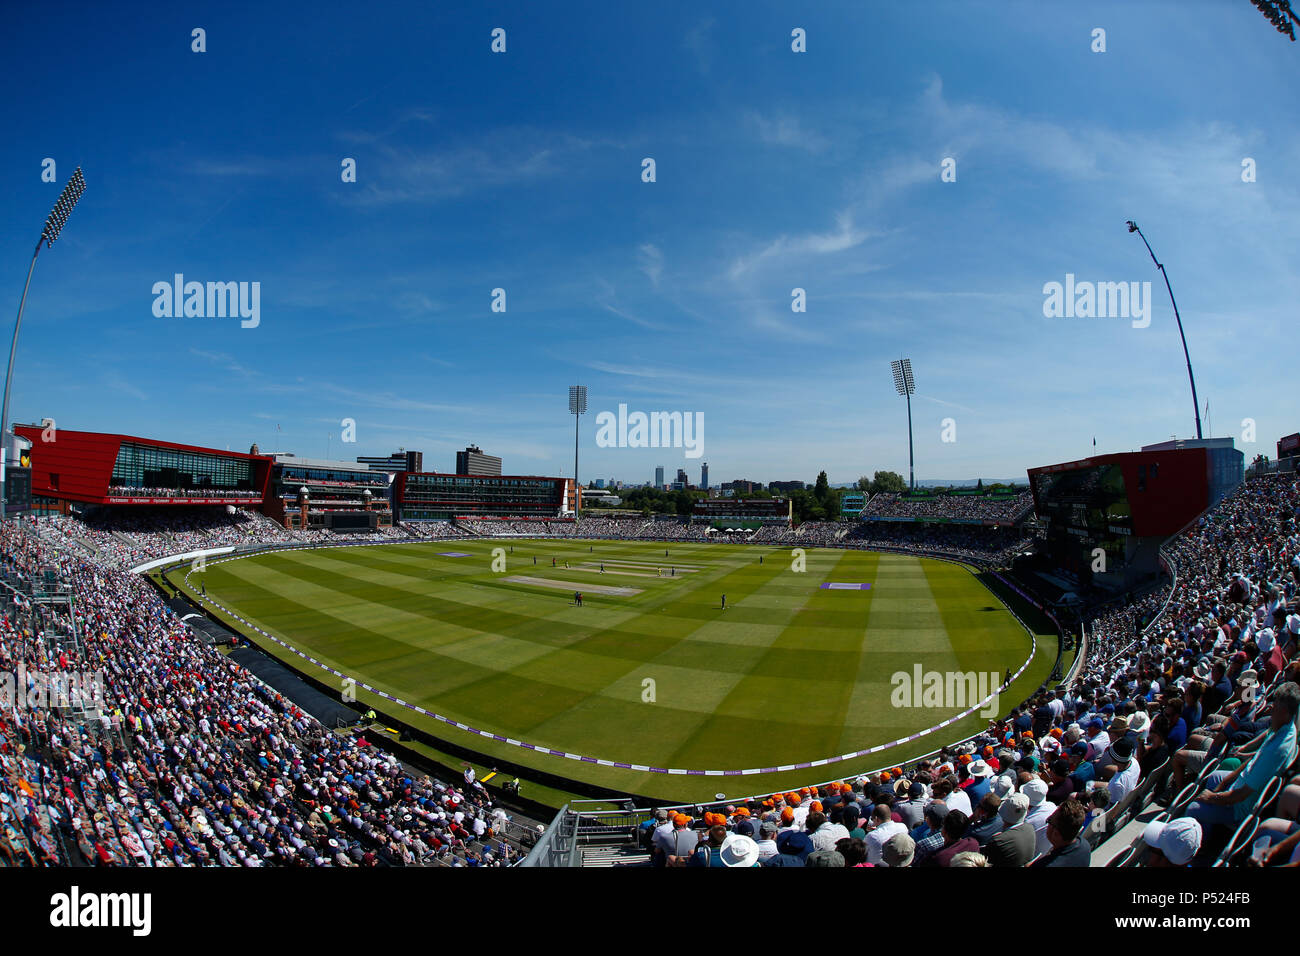 Manchester, UK. 24th June, 2018. Manchester, UK. 24th June, 2018. Sunday 24th June 2018, Emirates Old Trafford, 5th ODI Royal London One-Day Series England v Australia; General stadium view showing a capacity crowd watching Australia bat during the 1st innings against England. Credit: News Images /Alamy Live News Credit: News Images /Alamy Live News Stock Photo